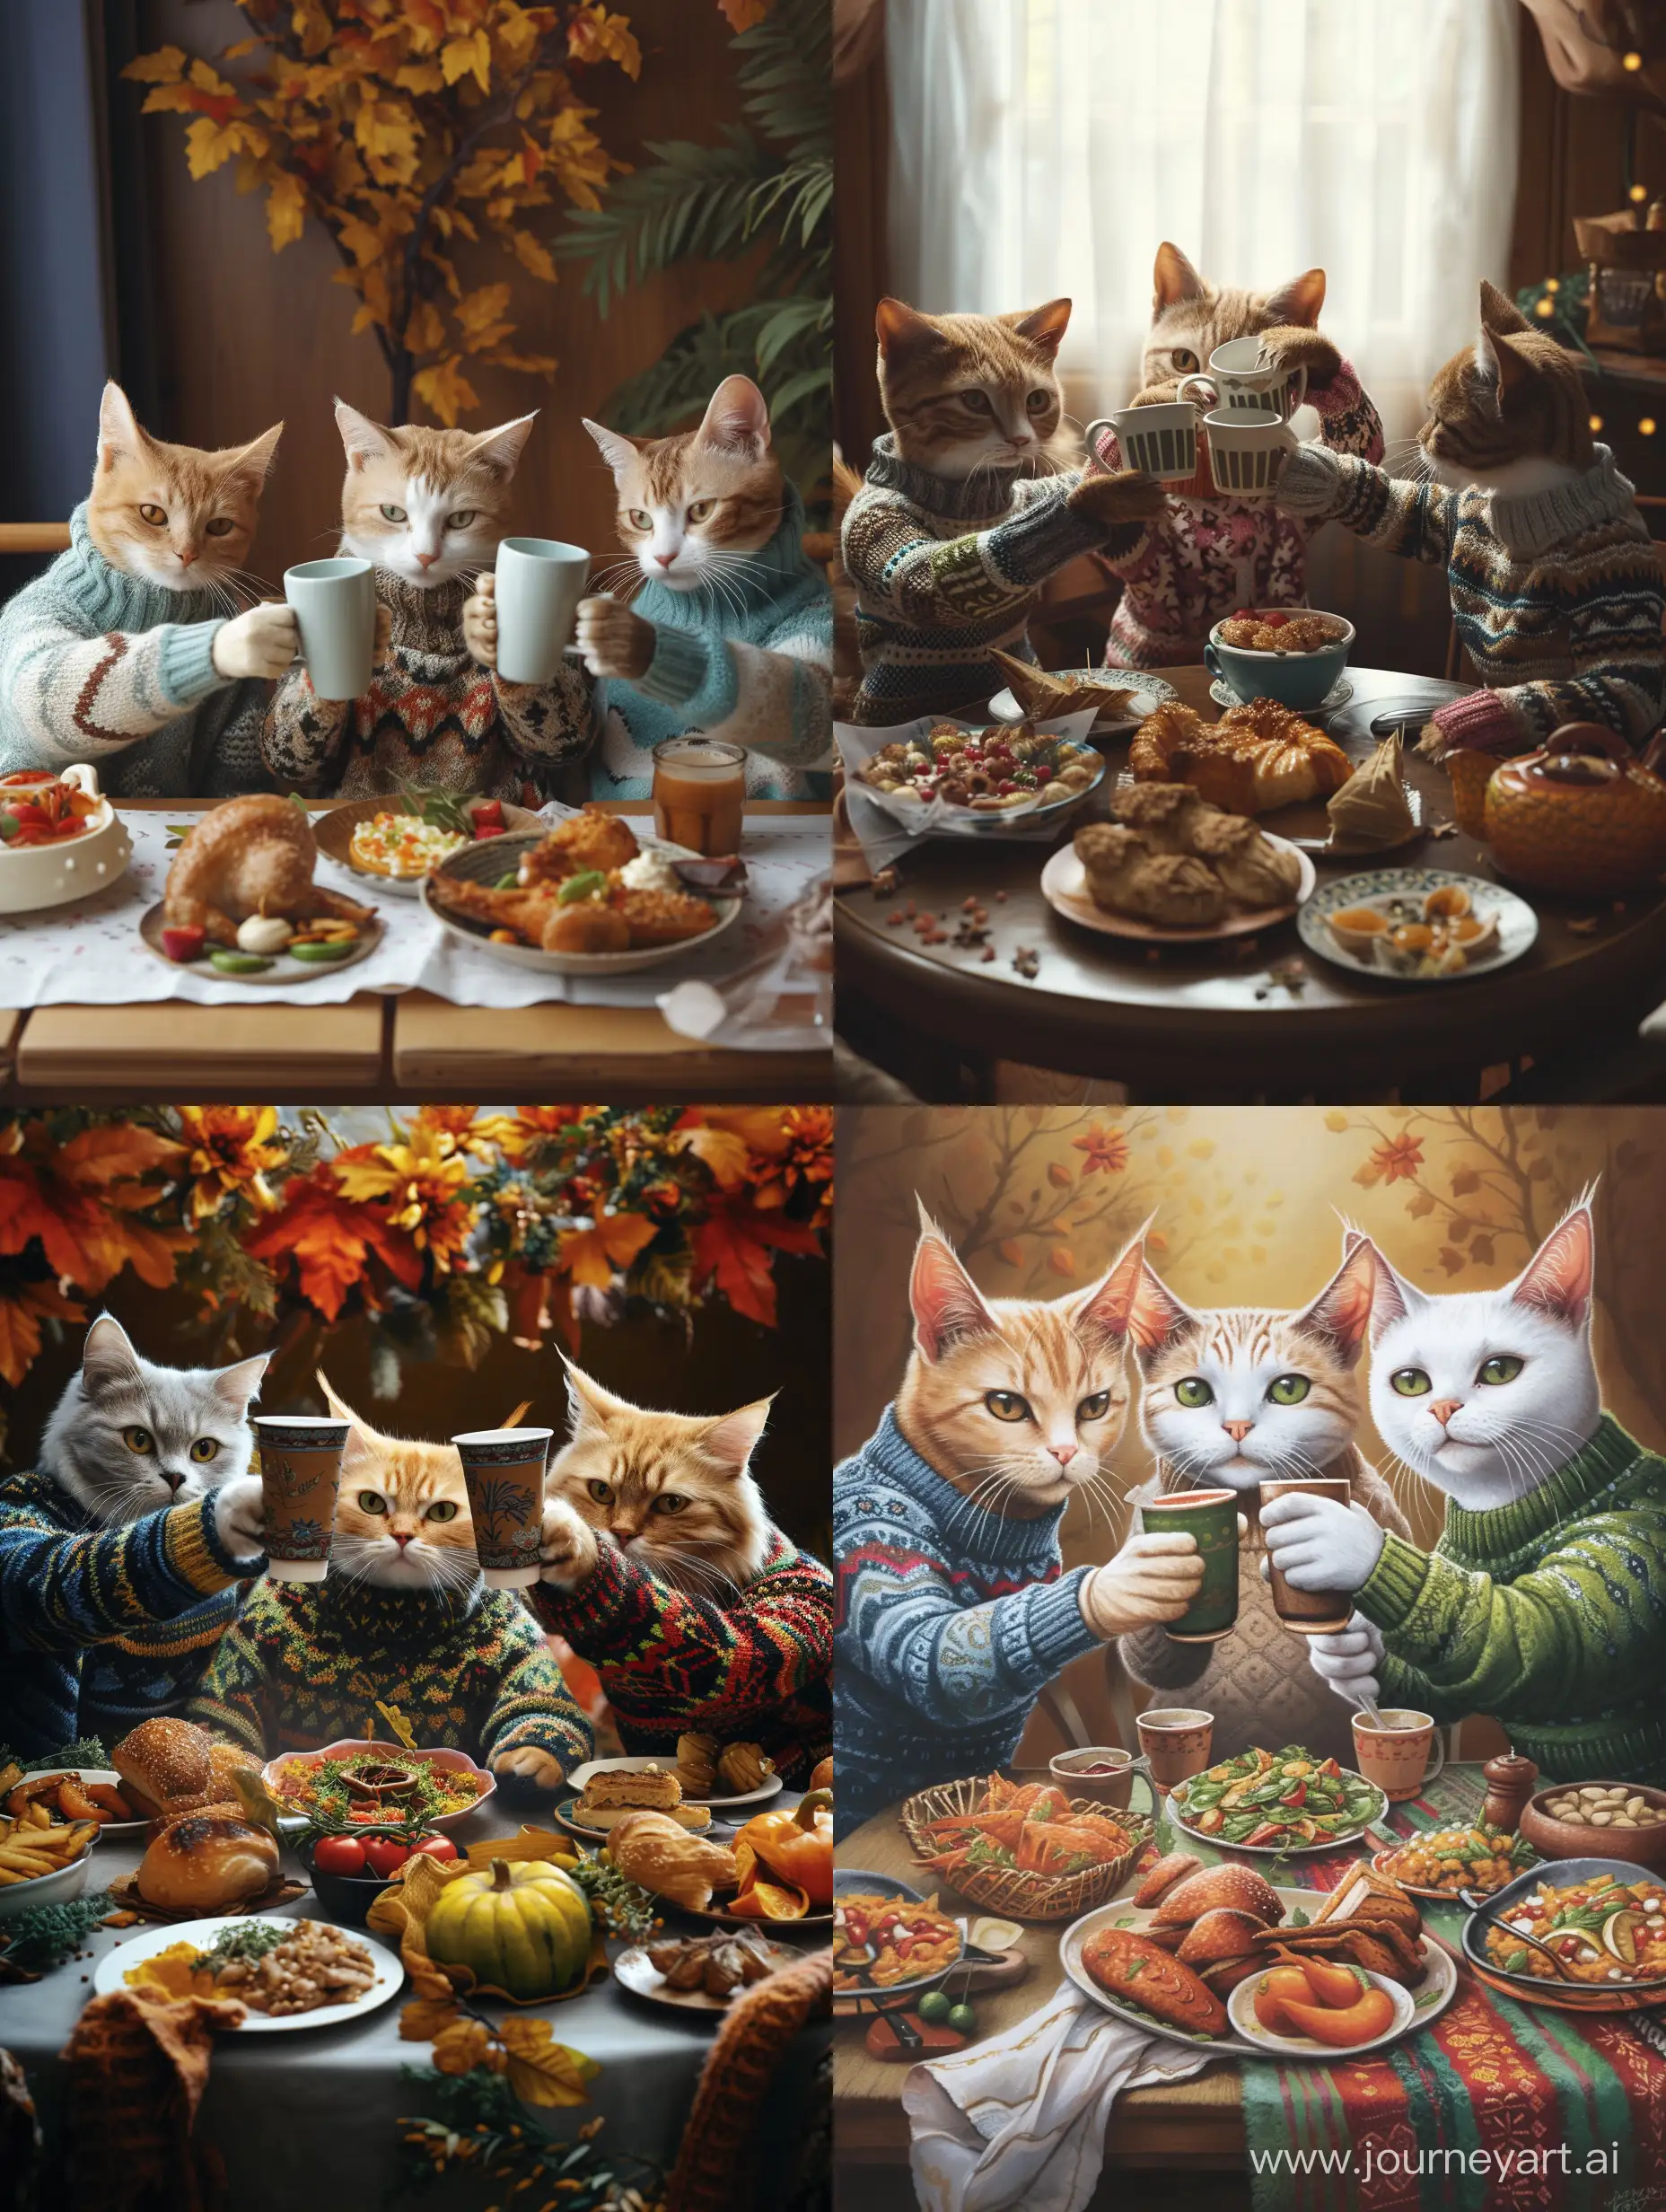 Three-Cats-in-Sweaters-Toasting-with-Cups-Surrounded-by-Delicious-Food